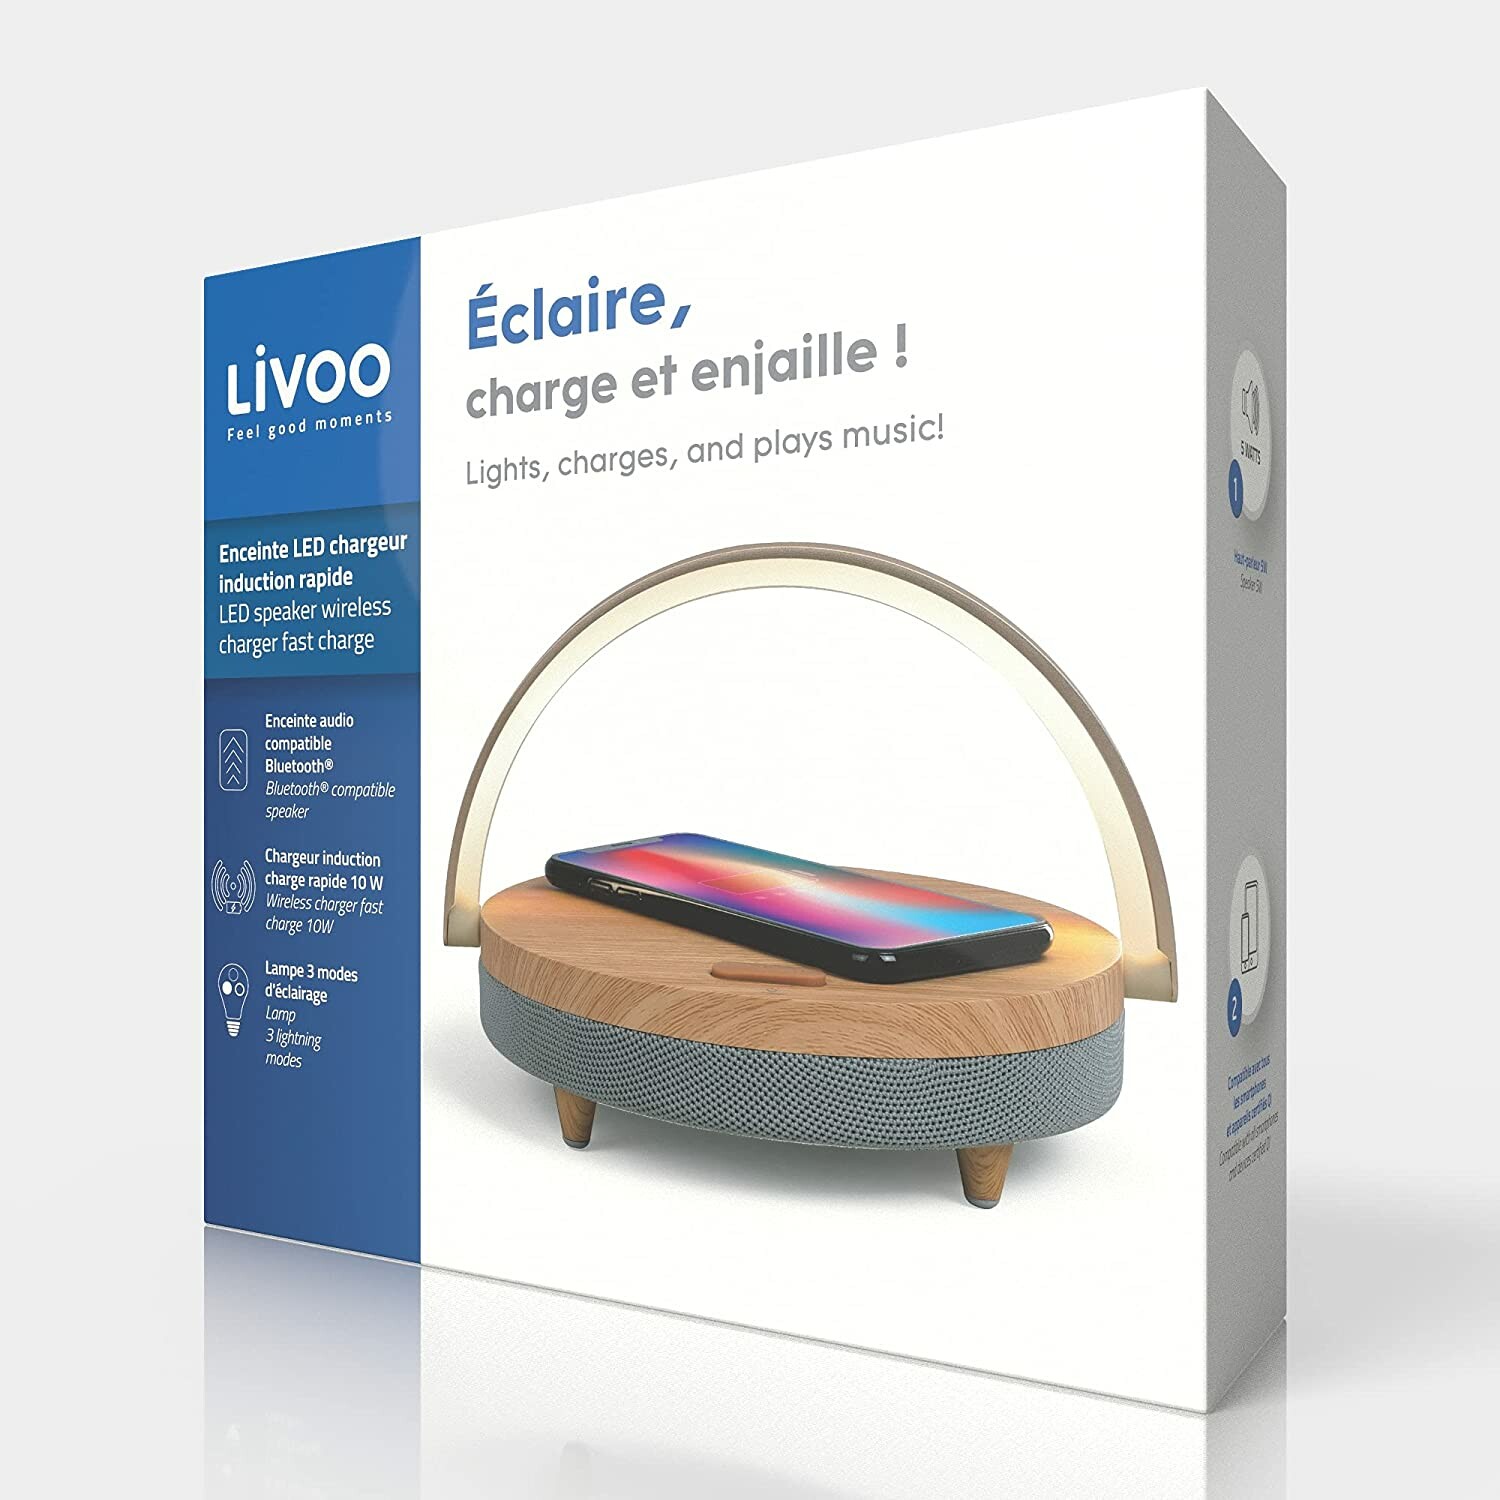 Enceinte chargeur induction fast charge Livoo – Objectif Tendance